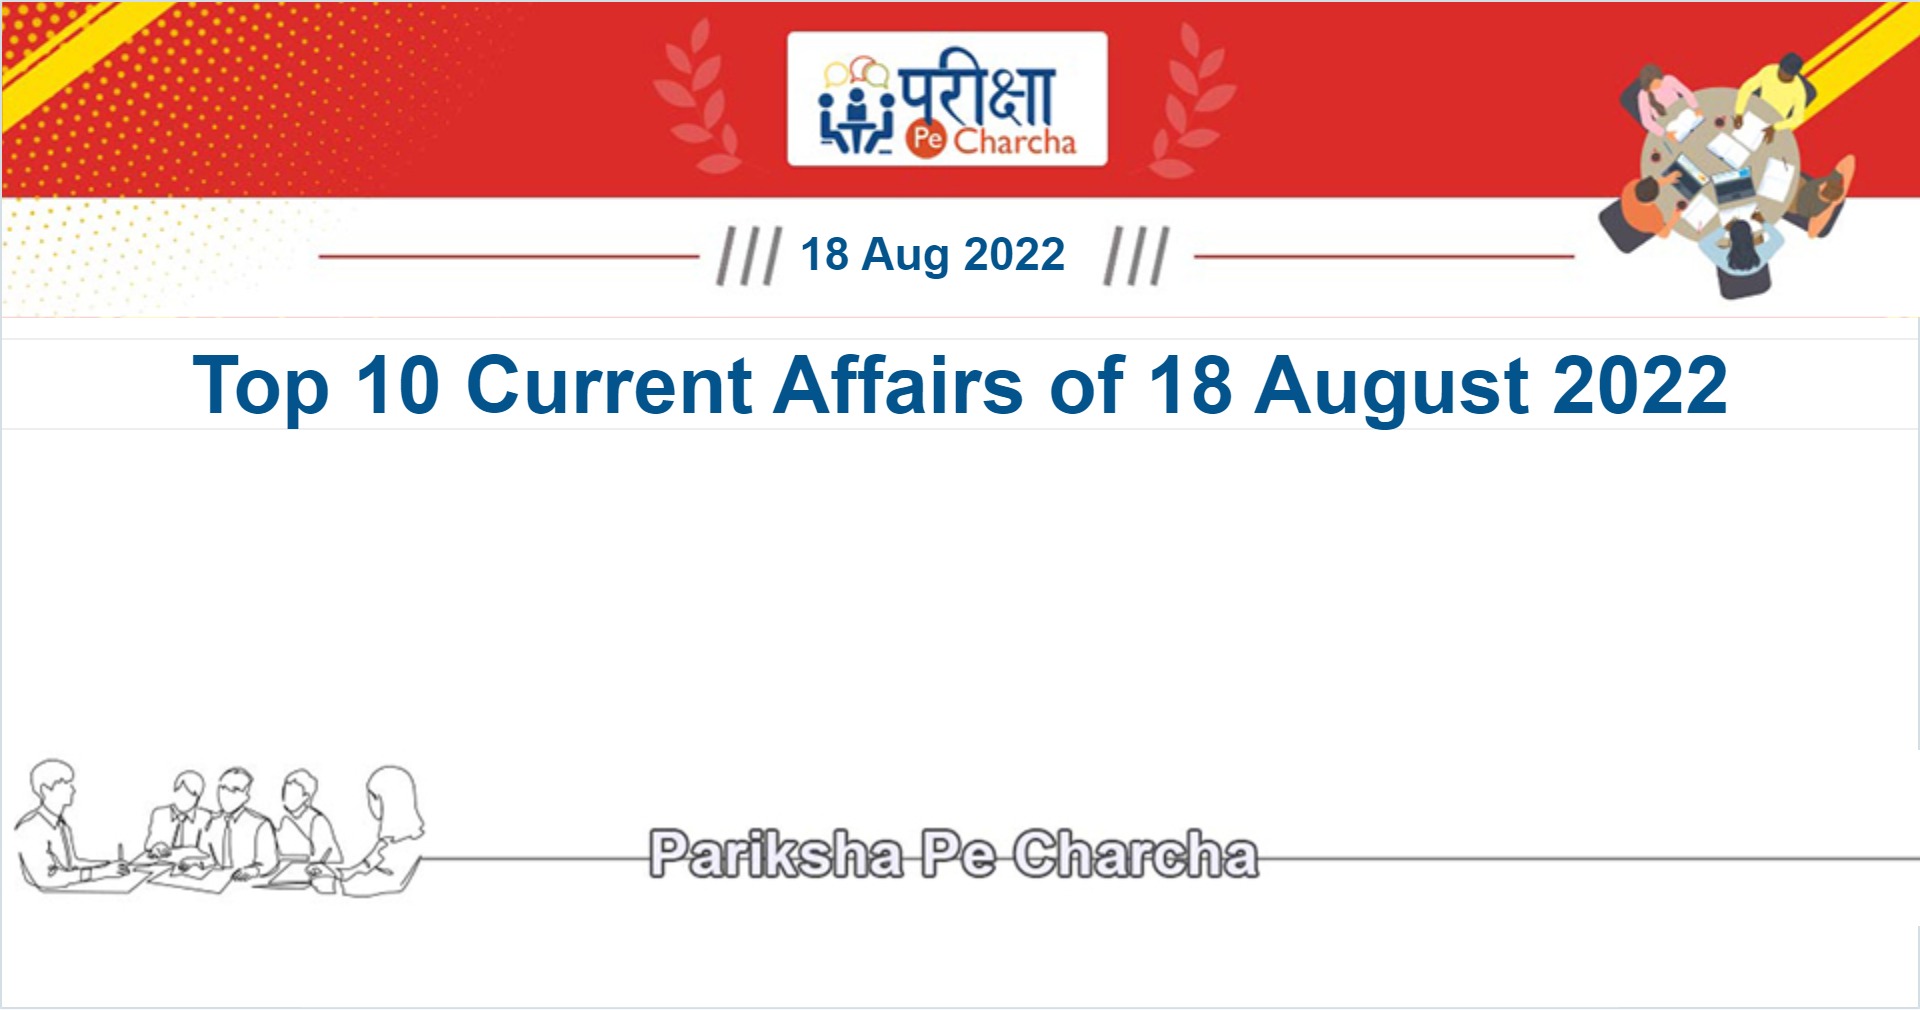 Current Affairs of 18 August 2022 in English and Hindi